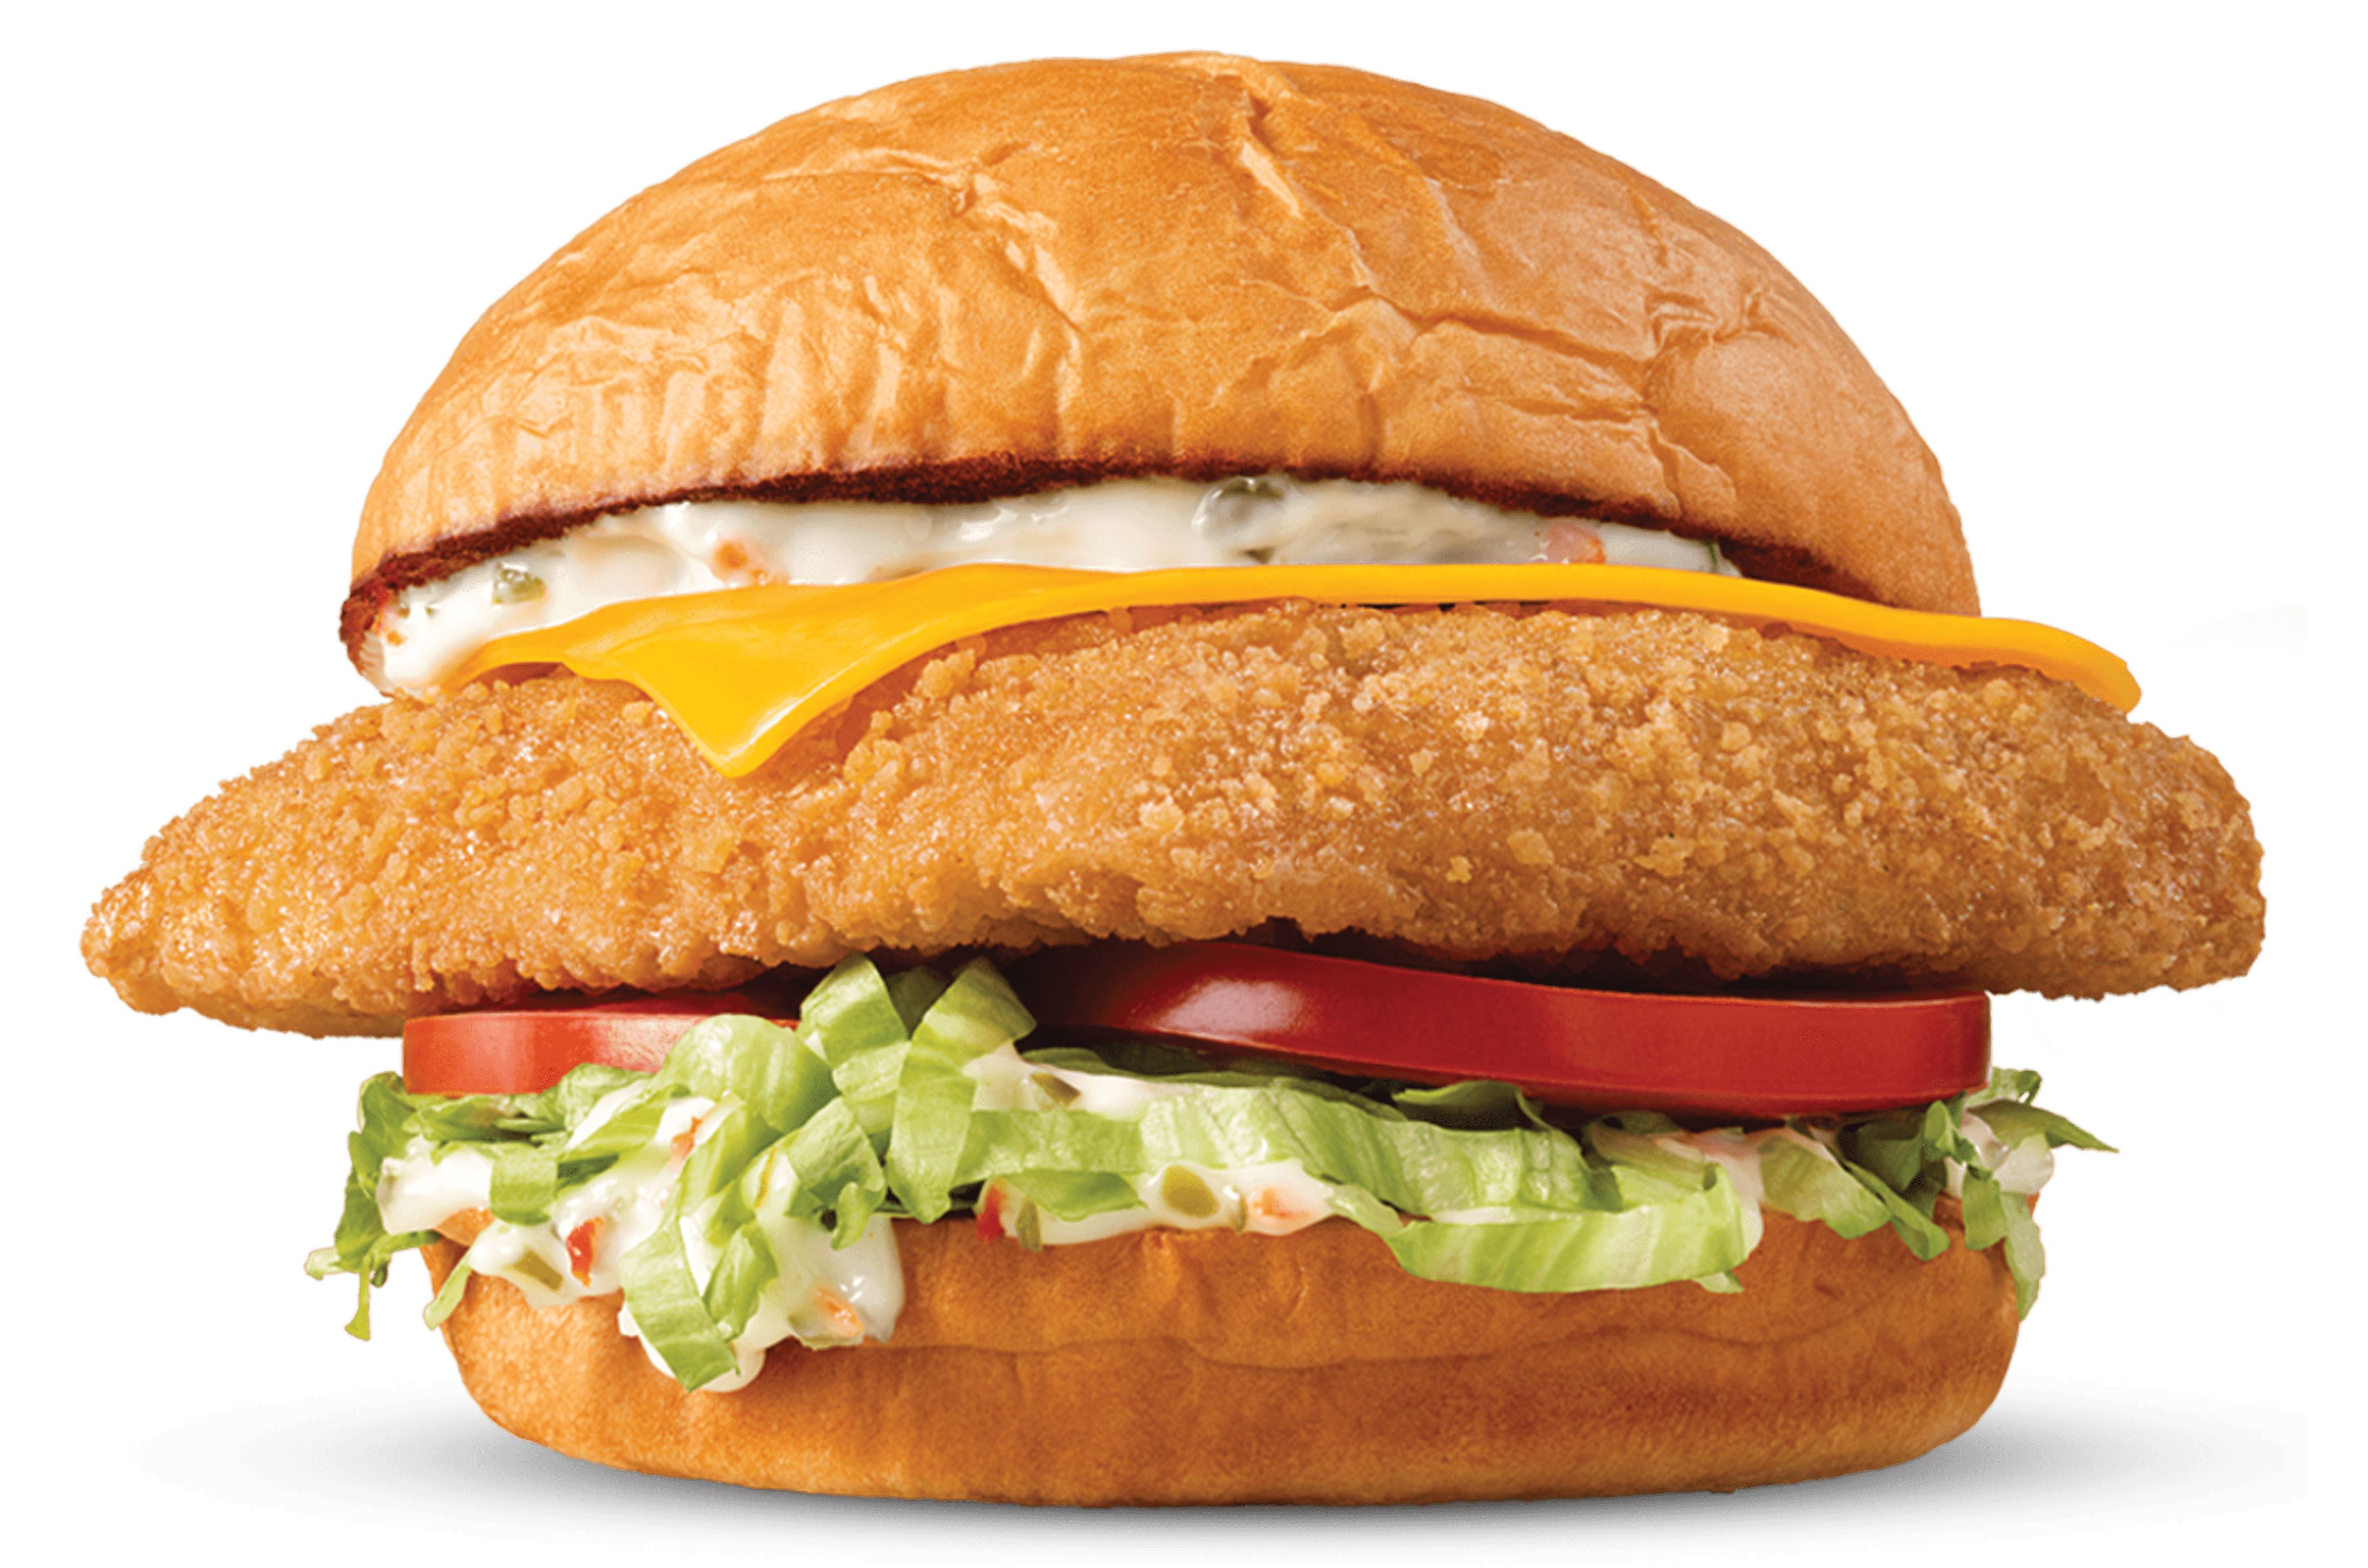 Arby’s is Serving Up the King’s Hawaiian Fish Deluxe and Crispy Fish Sandwich this New Year